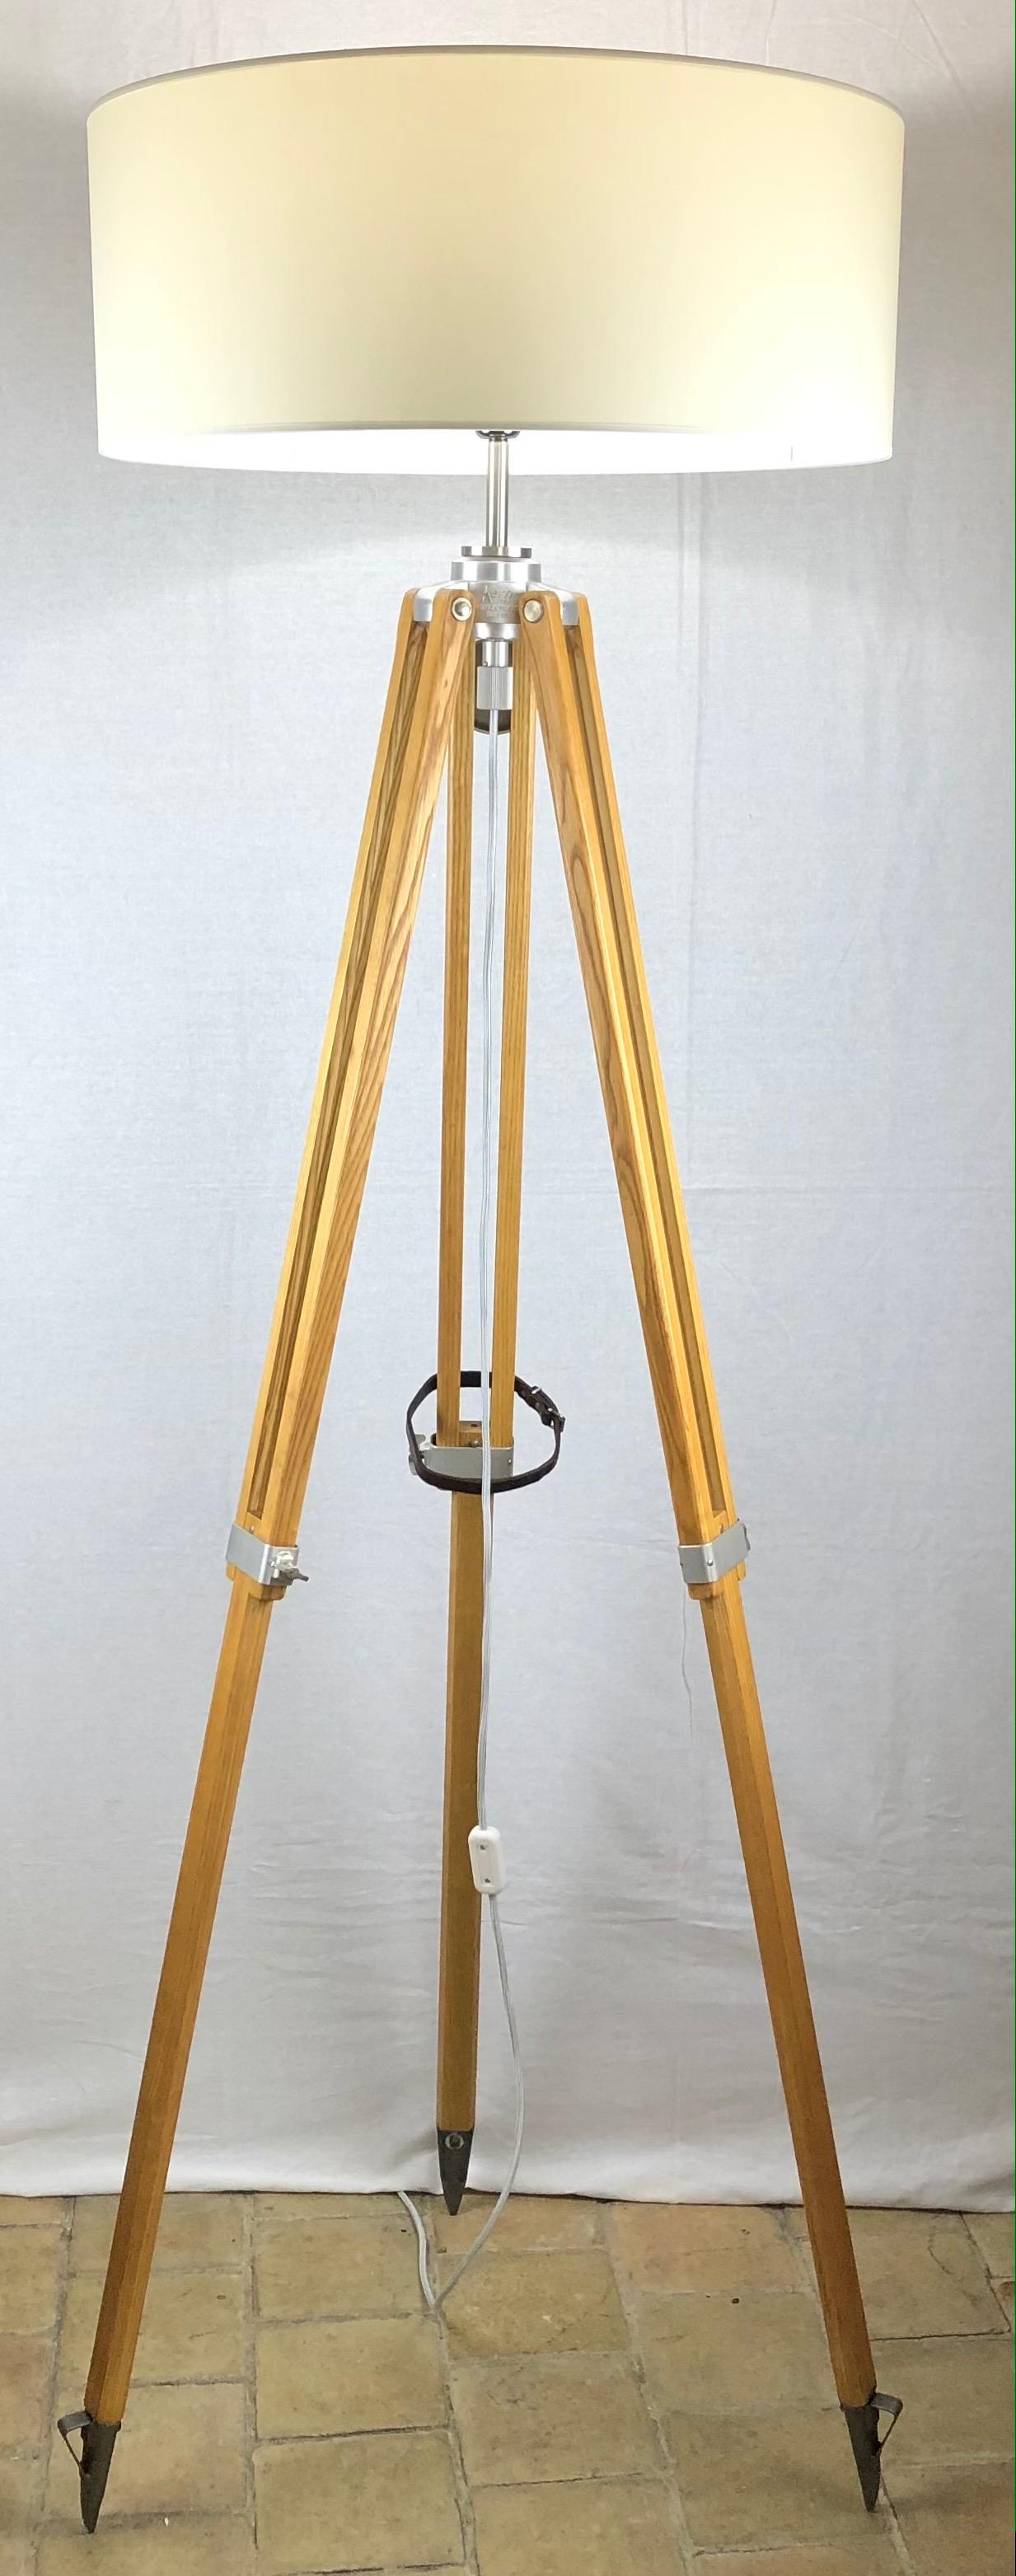 Adjustable Wooden Tripod Floor Lamp Natural Finish by Kern Aarau, Switzerland In Good Condition For Sale In Miami, FL